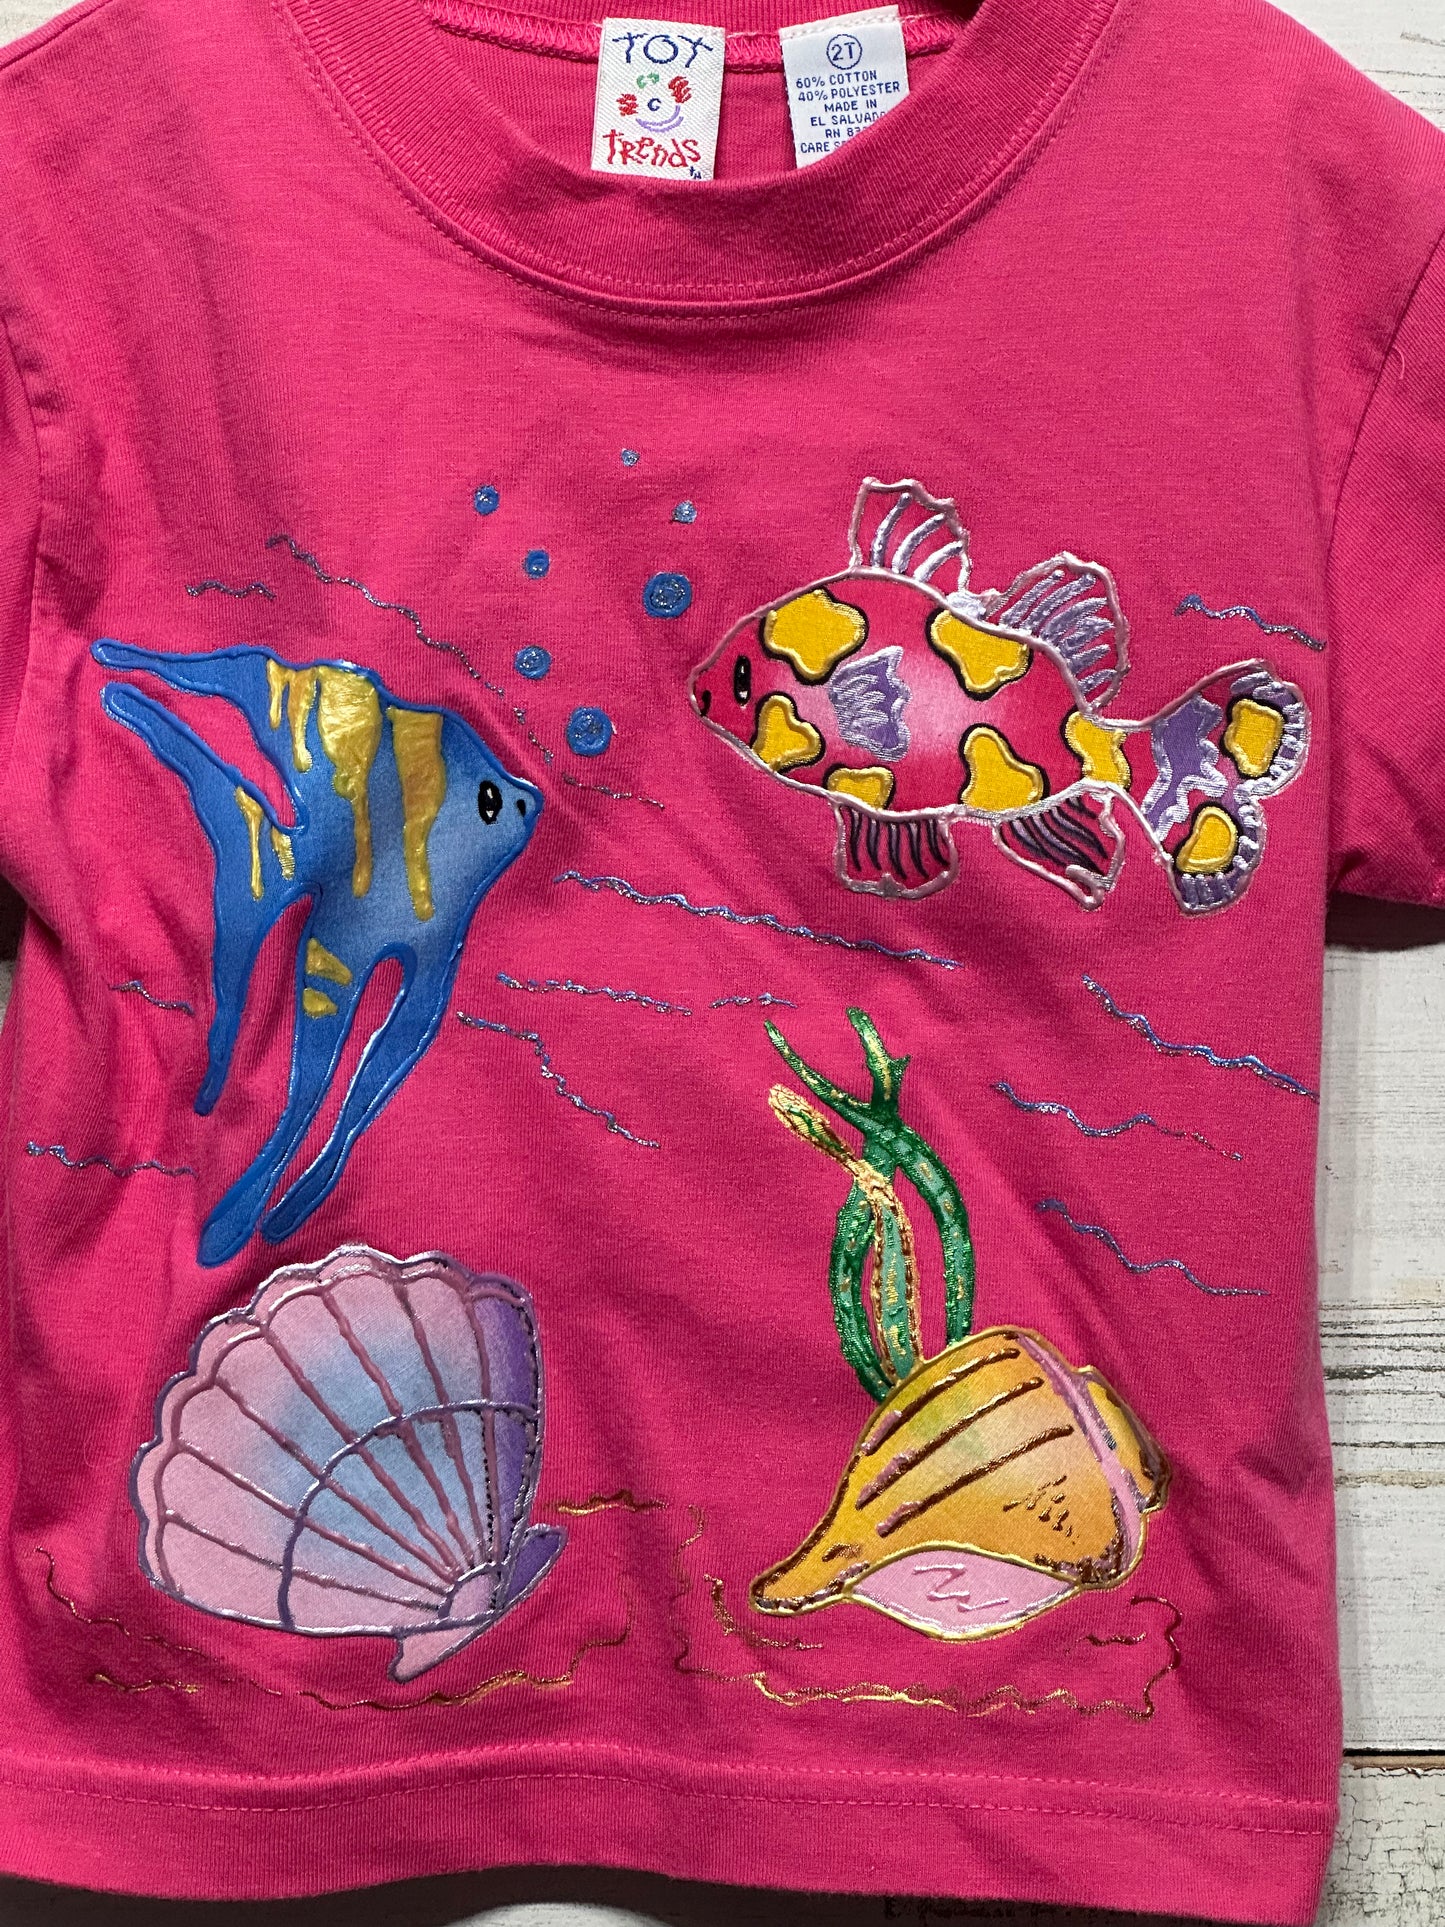 Girls Size 2t Tot Trendz Vintage 90s Hand Painted Fish Tee - Very Good Used Condition